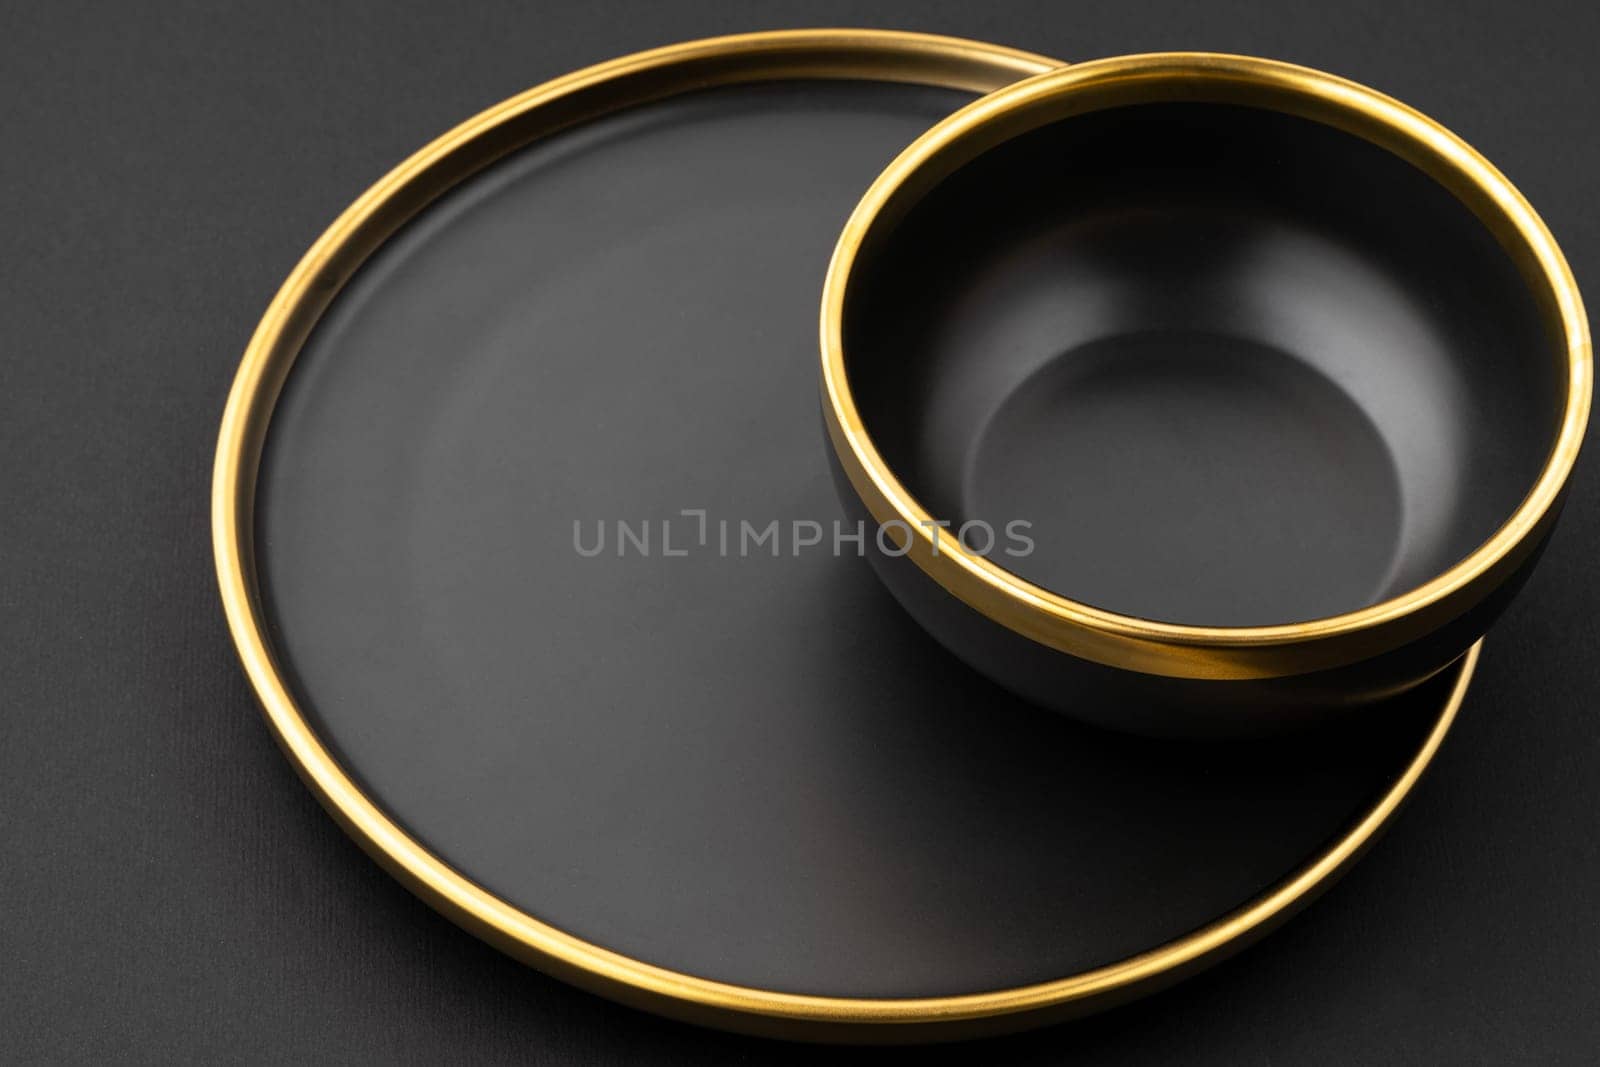 A set of black and golden ceramic plate and bowl on a black background